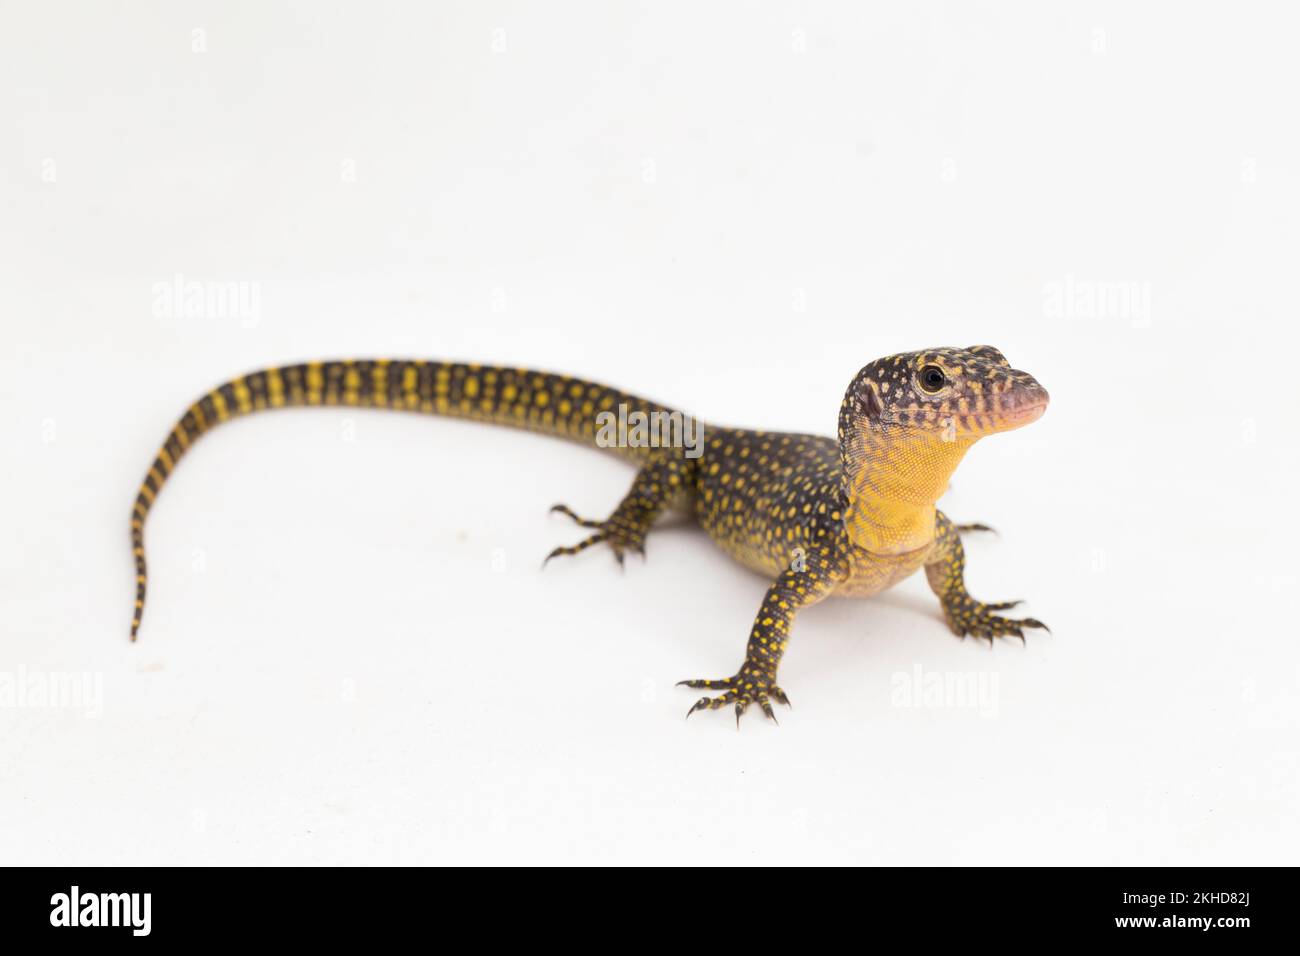 The mangrove monitor or Western Pacific monitor lizard (Varanus indicus) isolated on white background Stock Photo